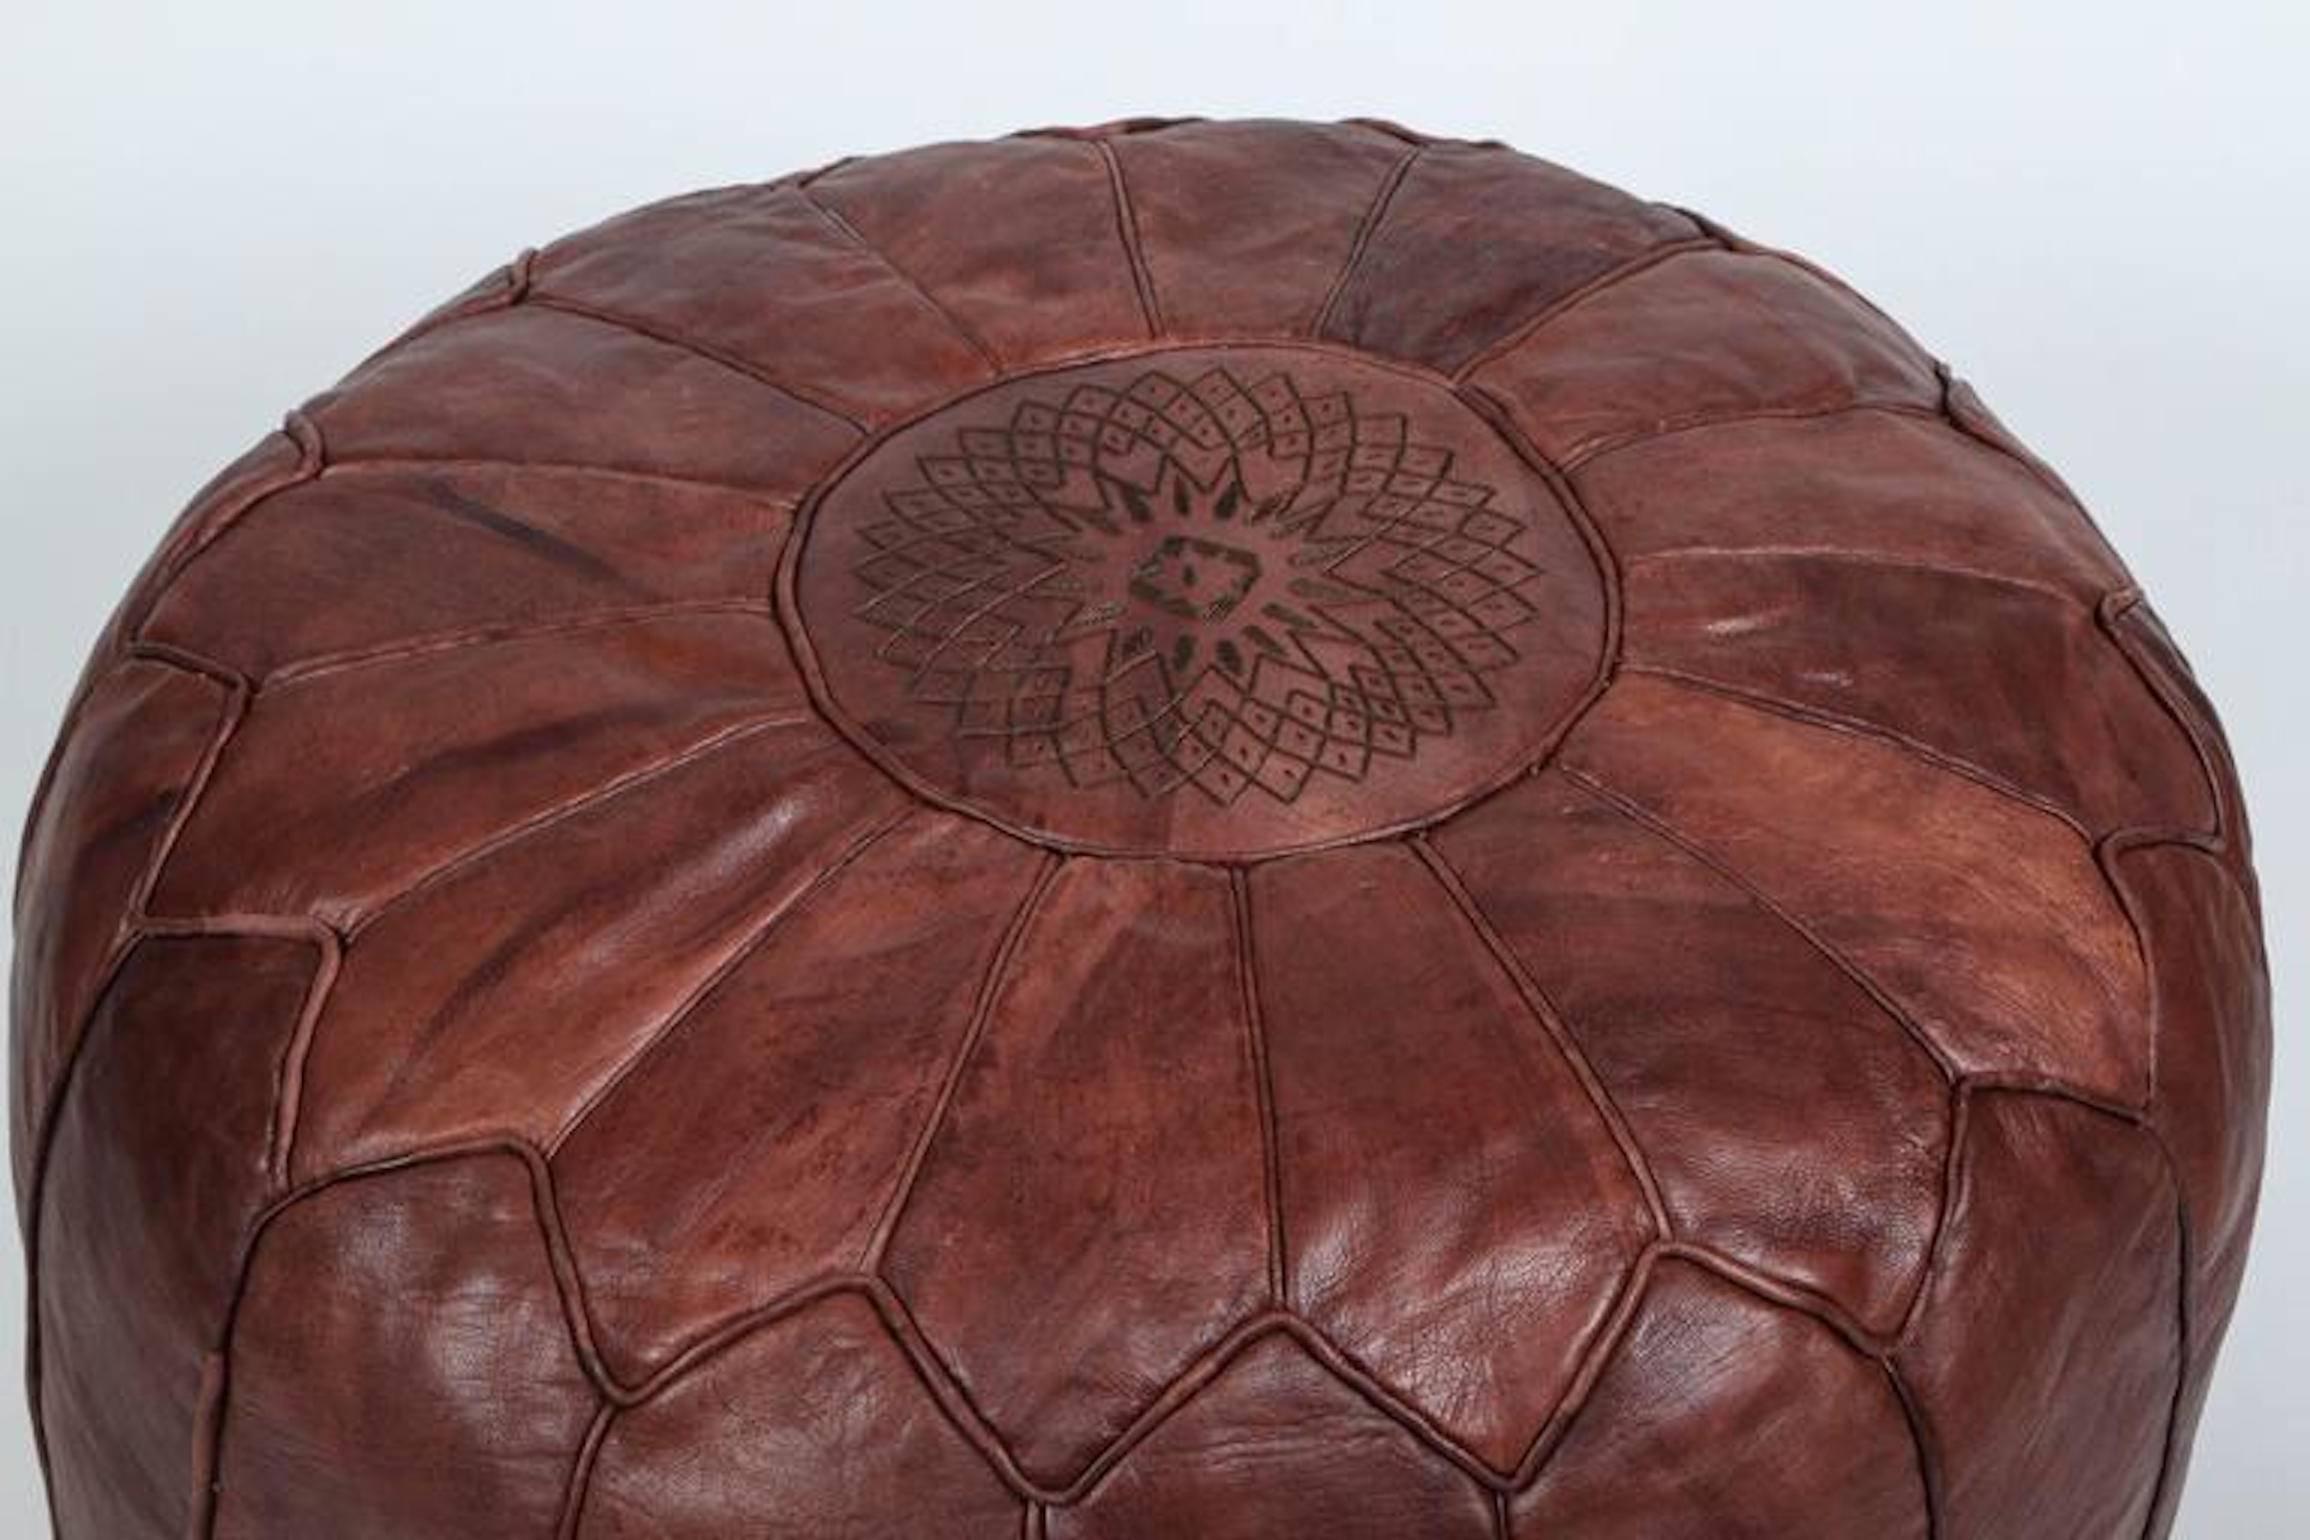 Large vintage round Moroccan leather pouf, handcrafted in chocolate brown camel leather.
Hand tooled and embroidered on the top with the Moorish star by Moroccan artisans in Marrakech.
Multiple available please contact us if you need more.
$1250